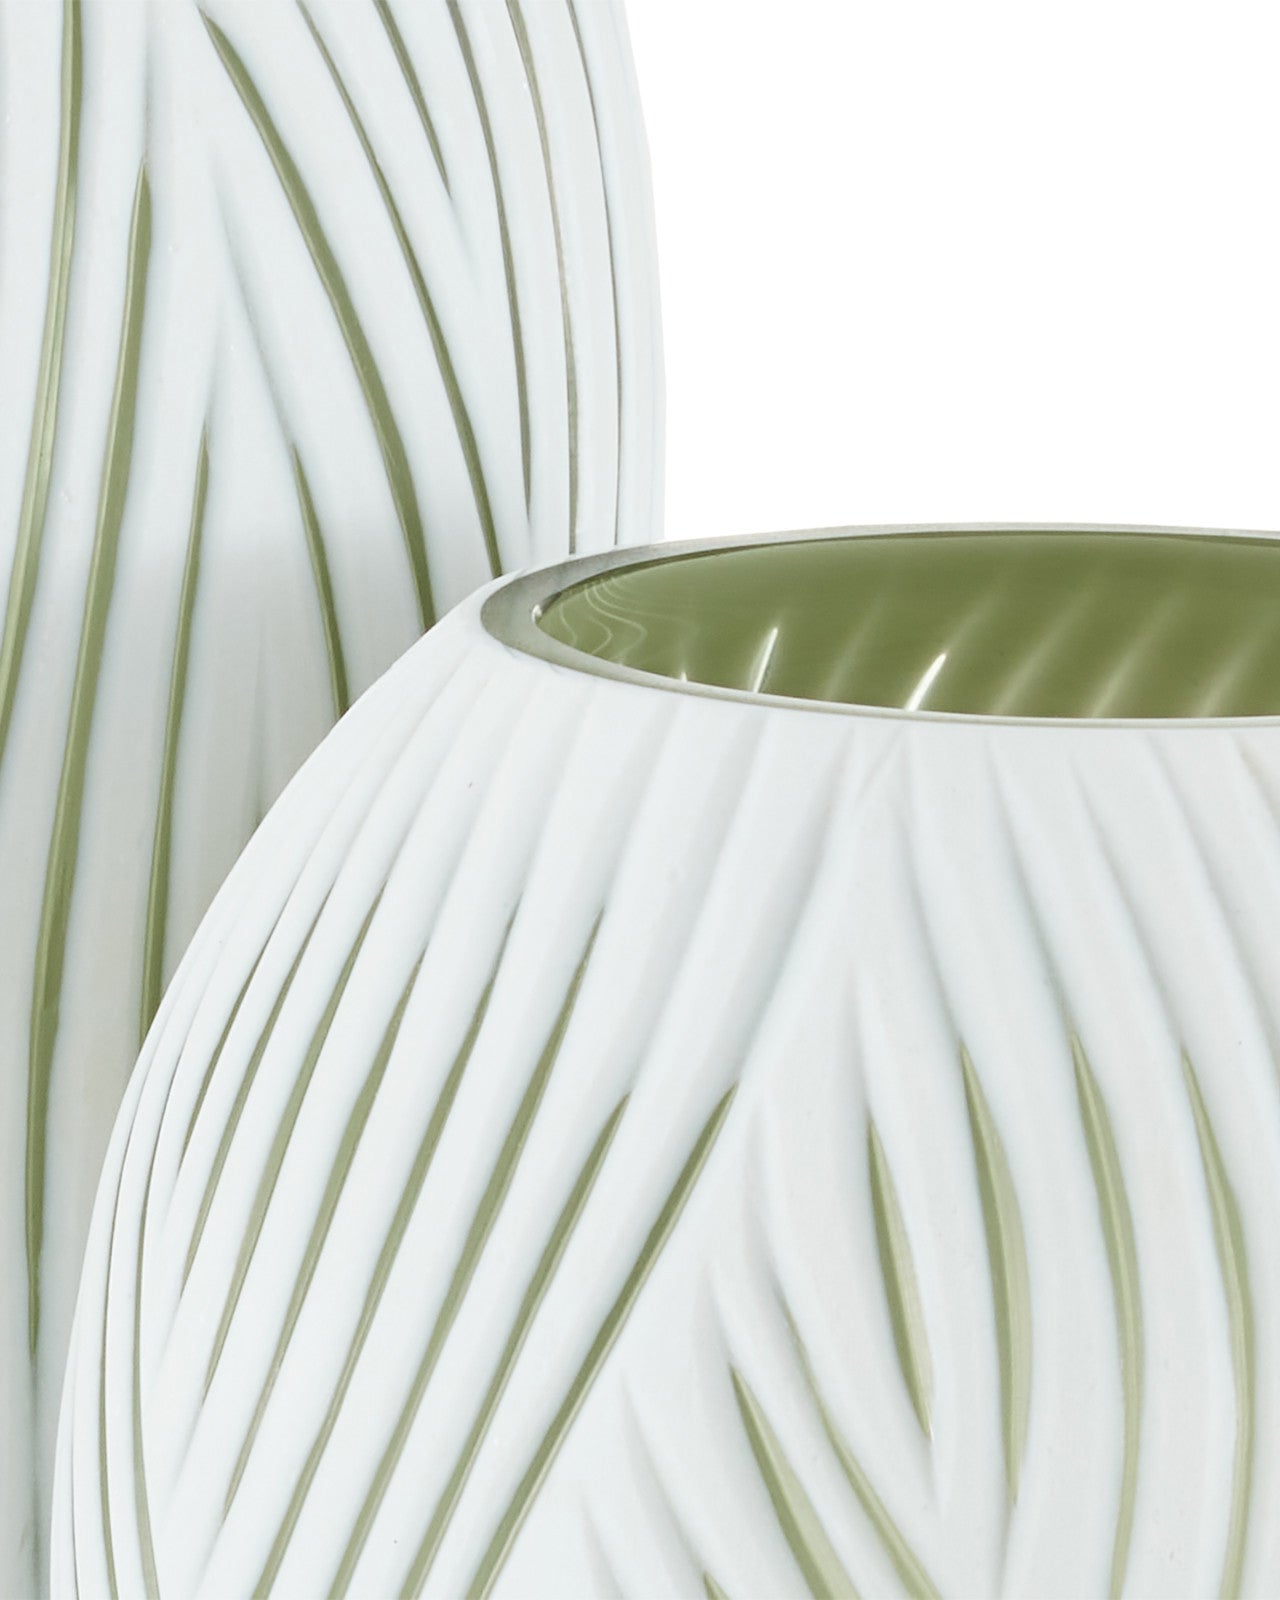 VASE GLASS WHITE/GREEN (Available in 2 Sizes)